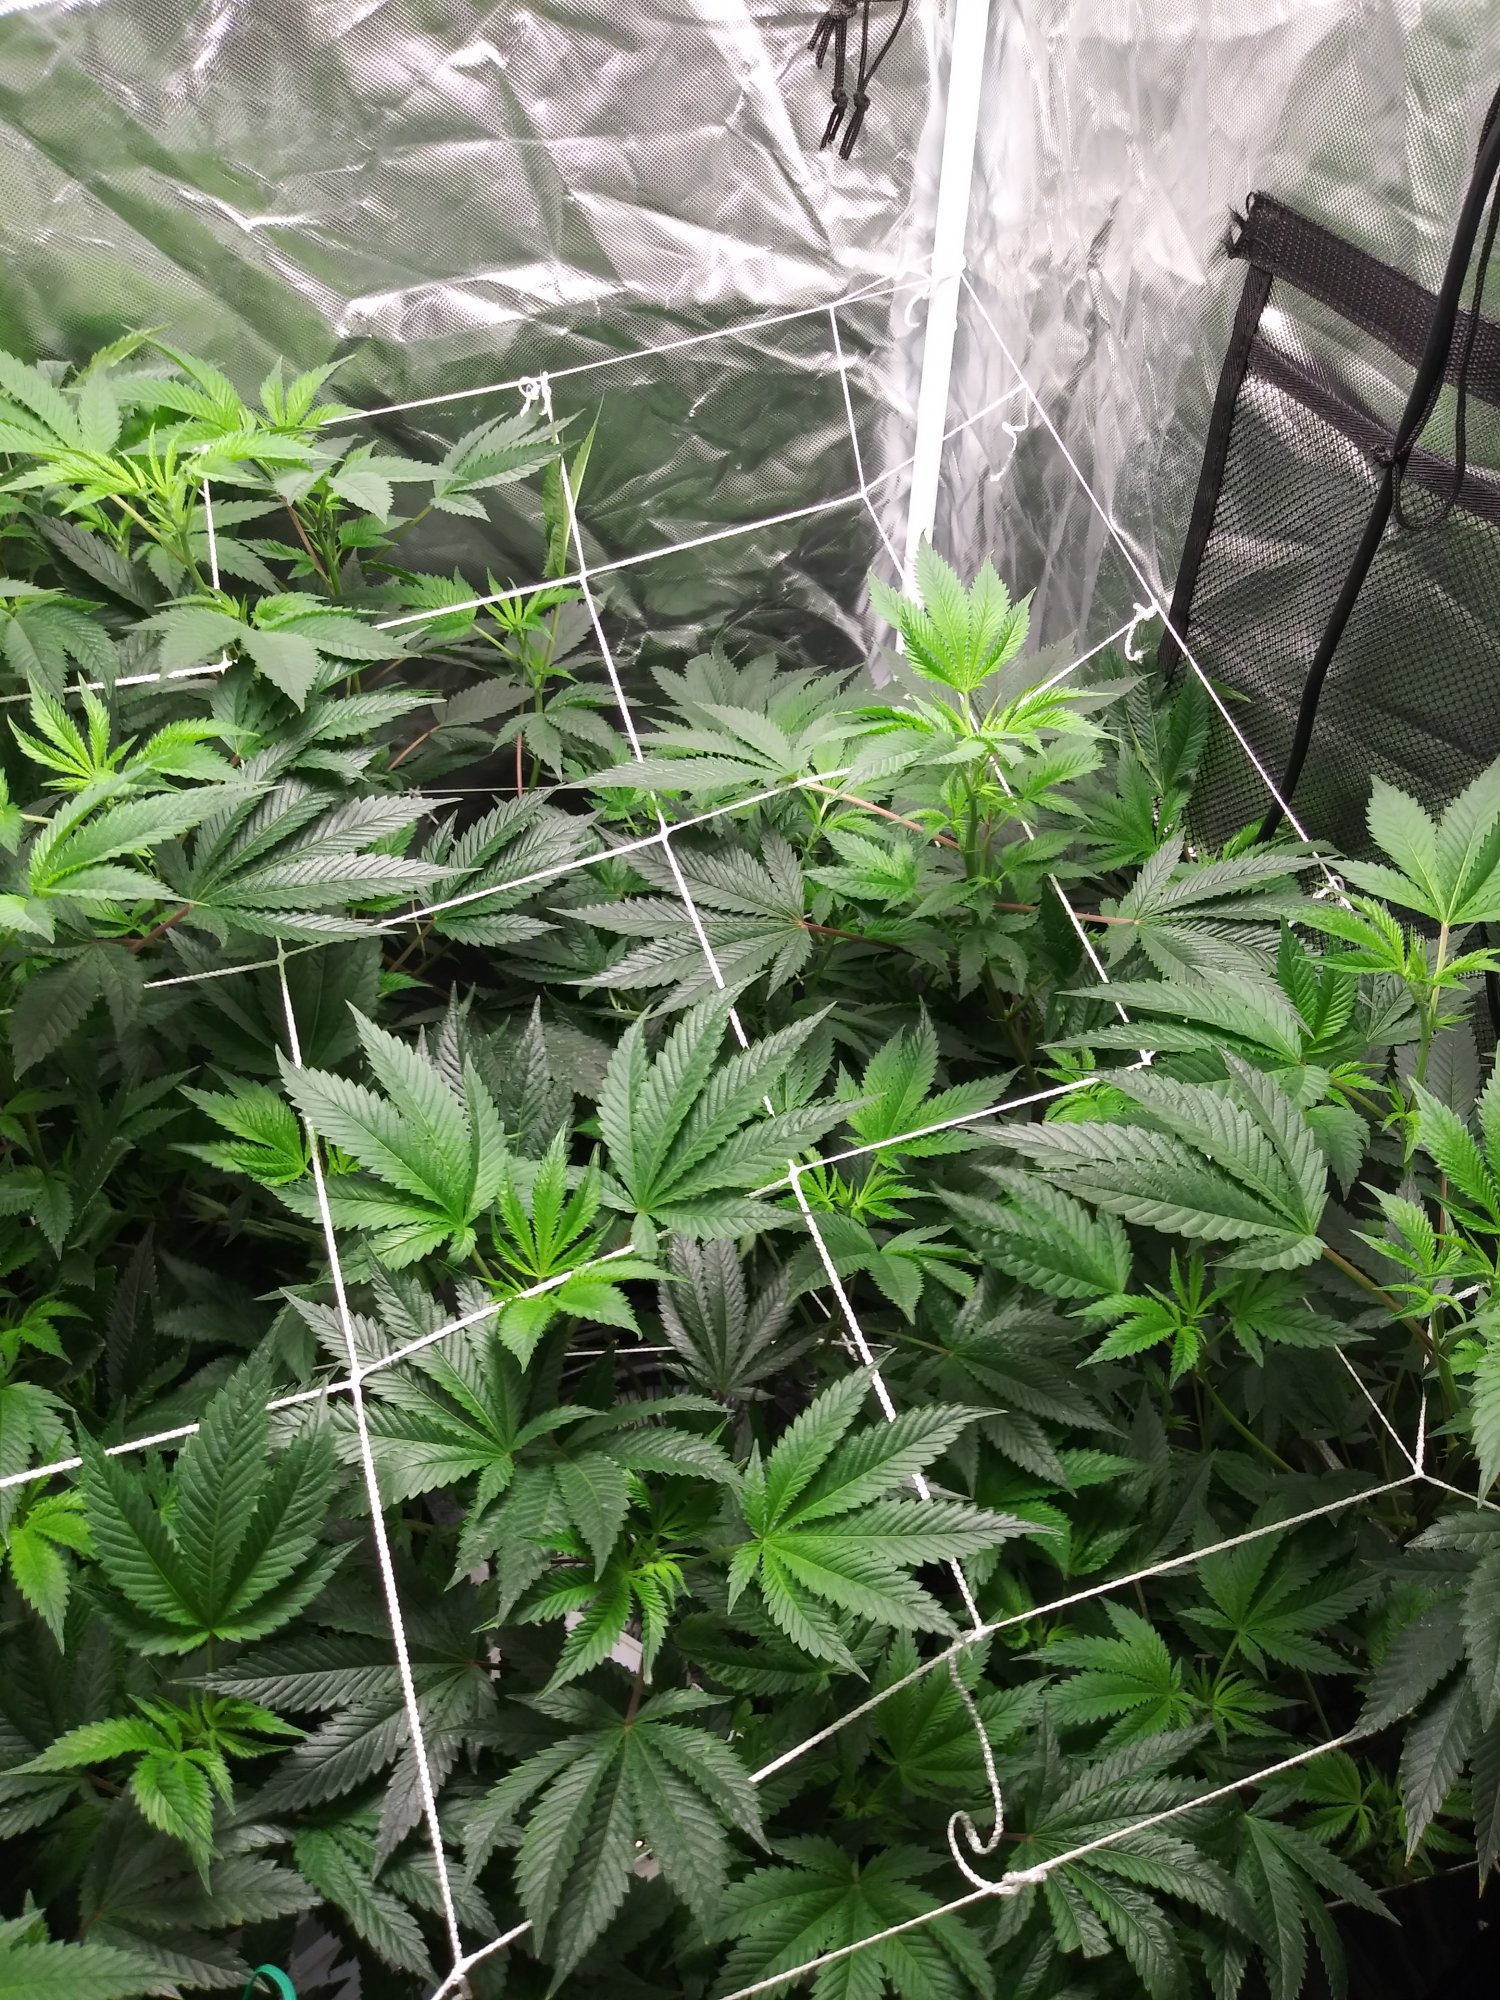 Having problems on my first grow need help please 2